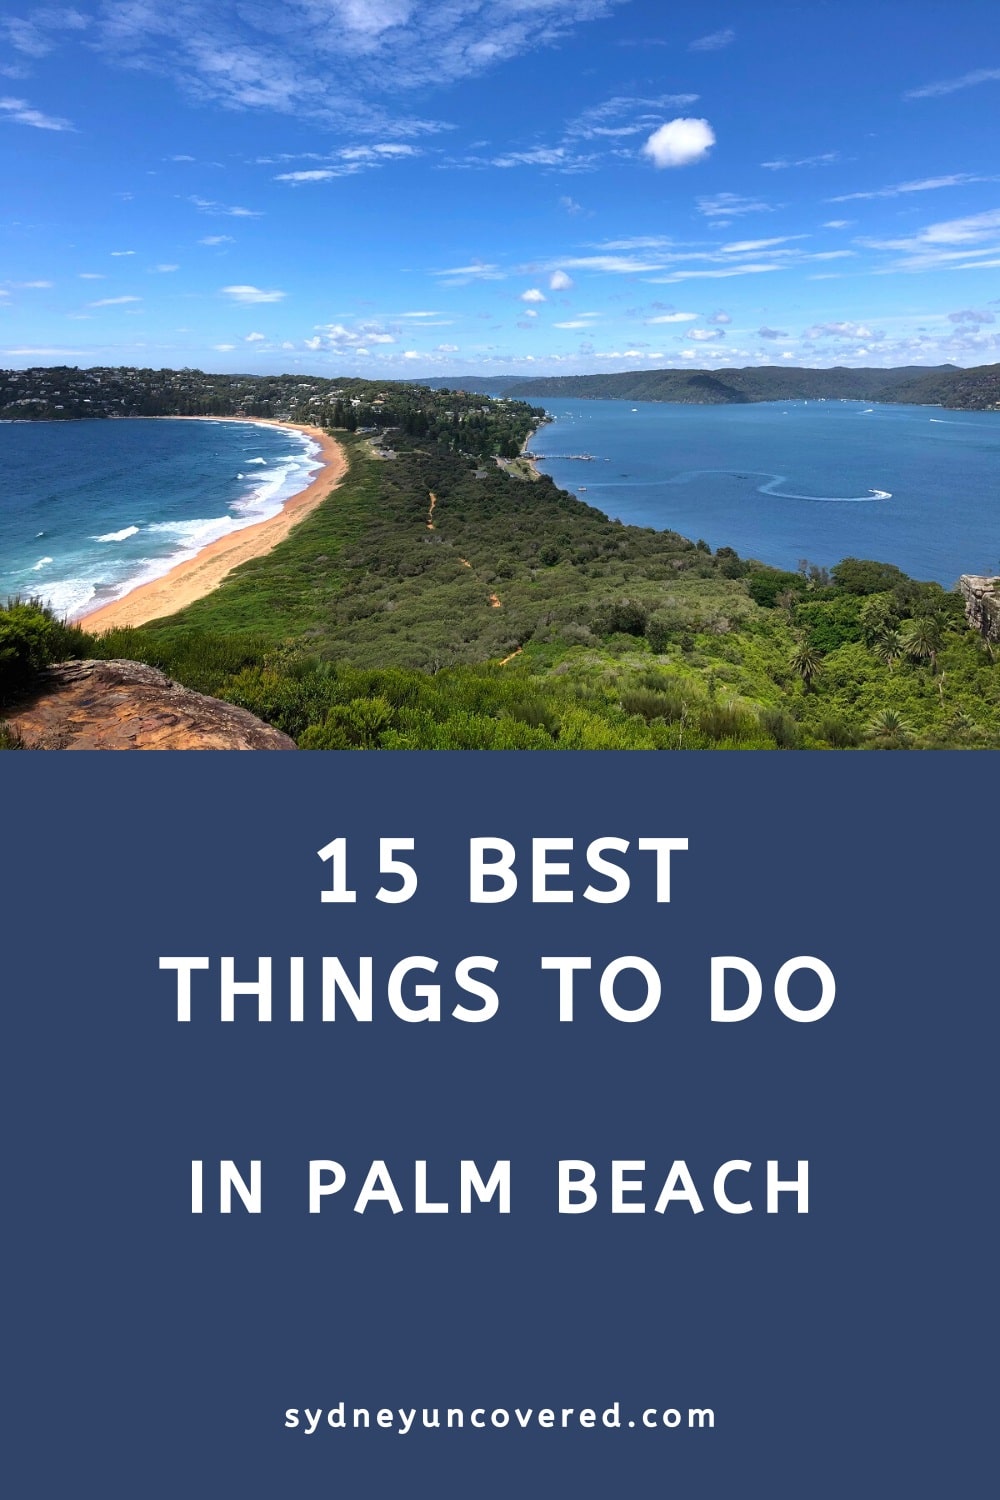 15 Best things to do in Palm Beach